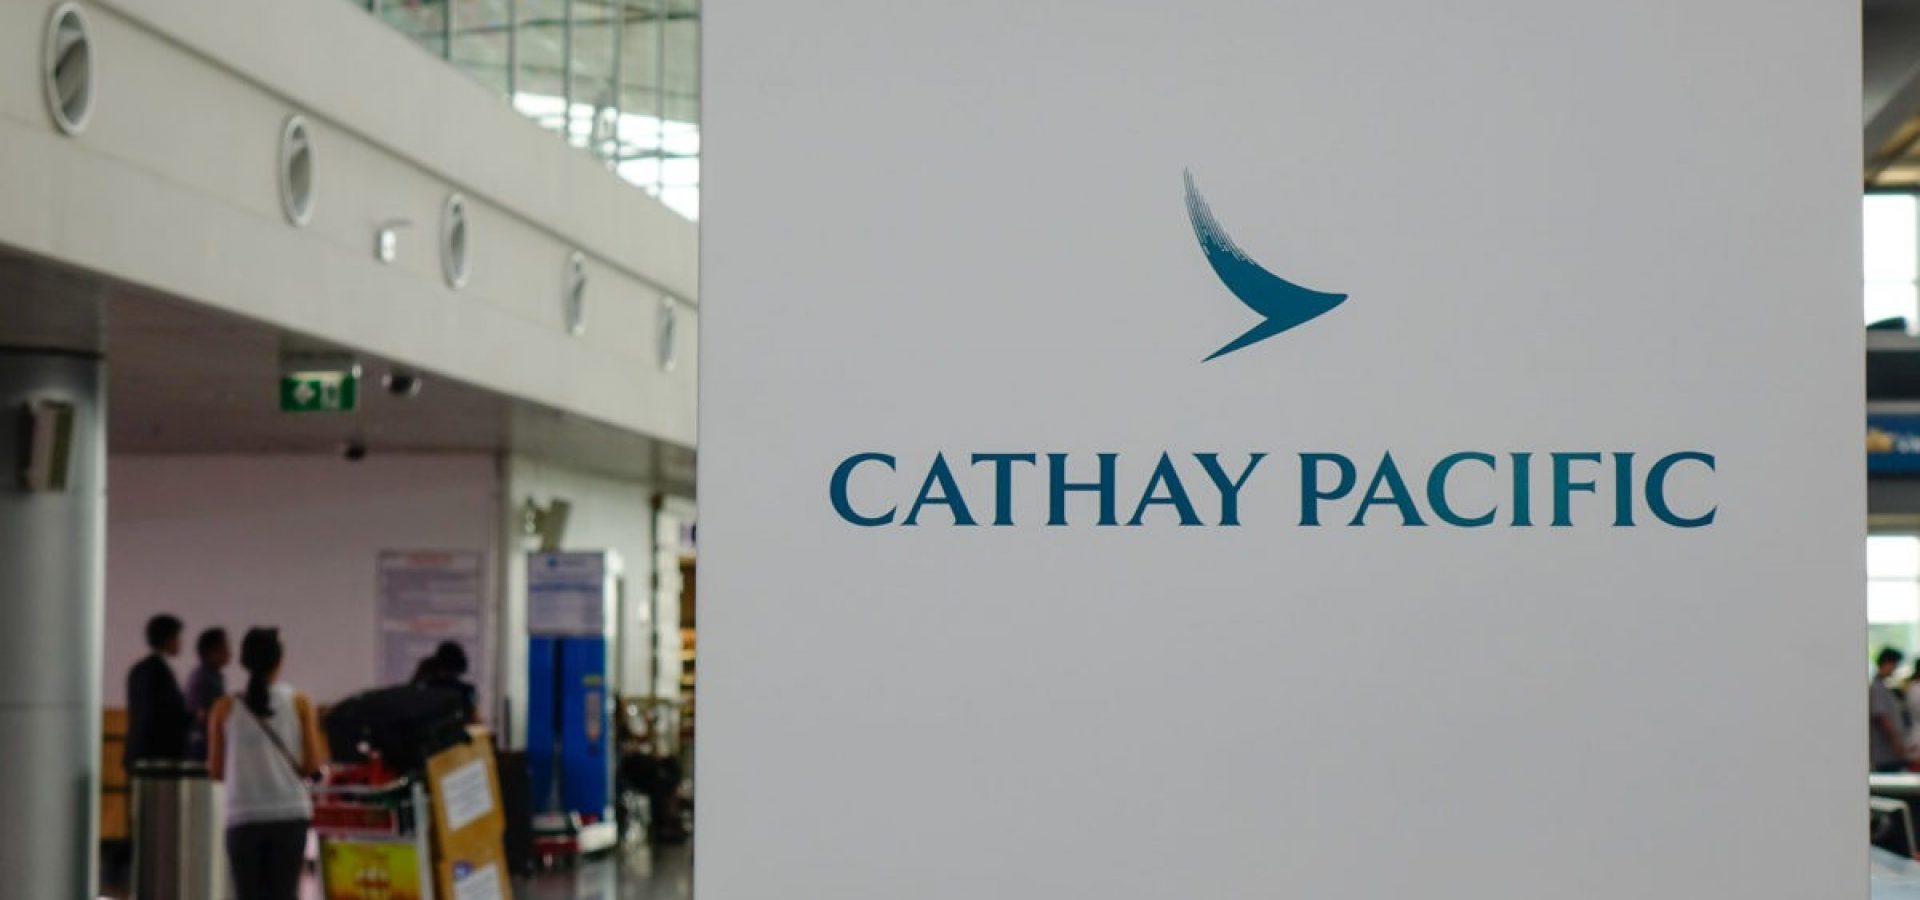 Cathay Pacific and protests in Hong Kong